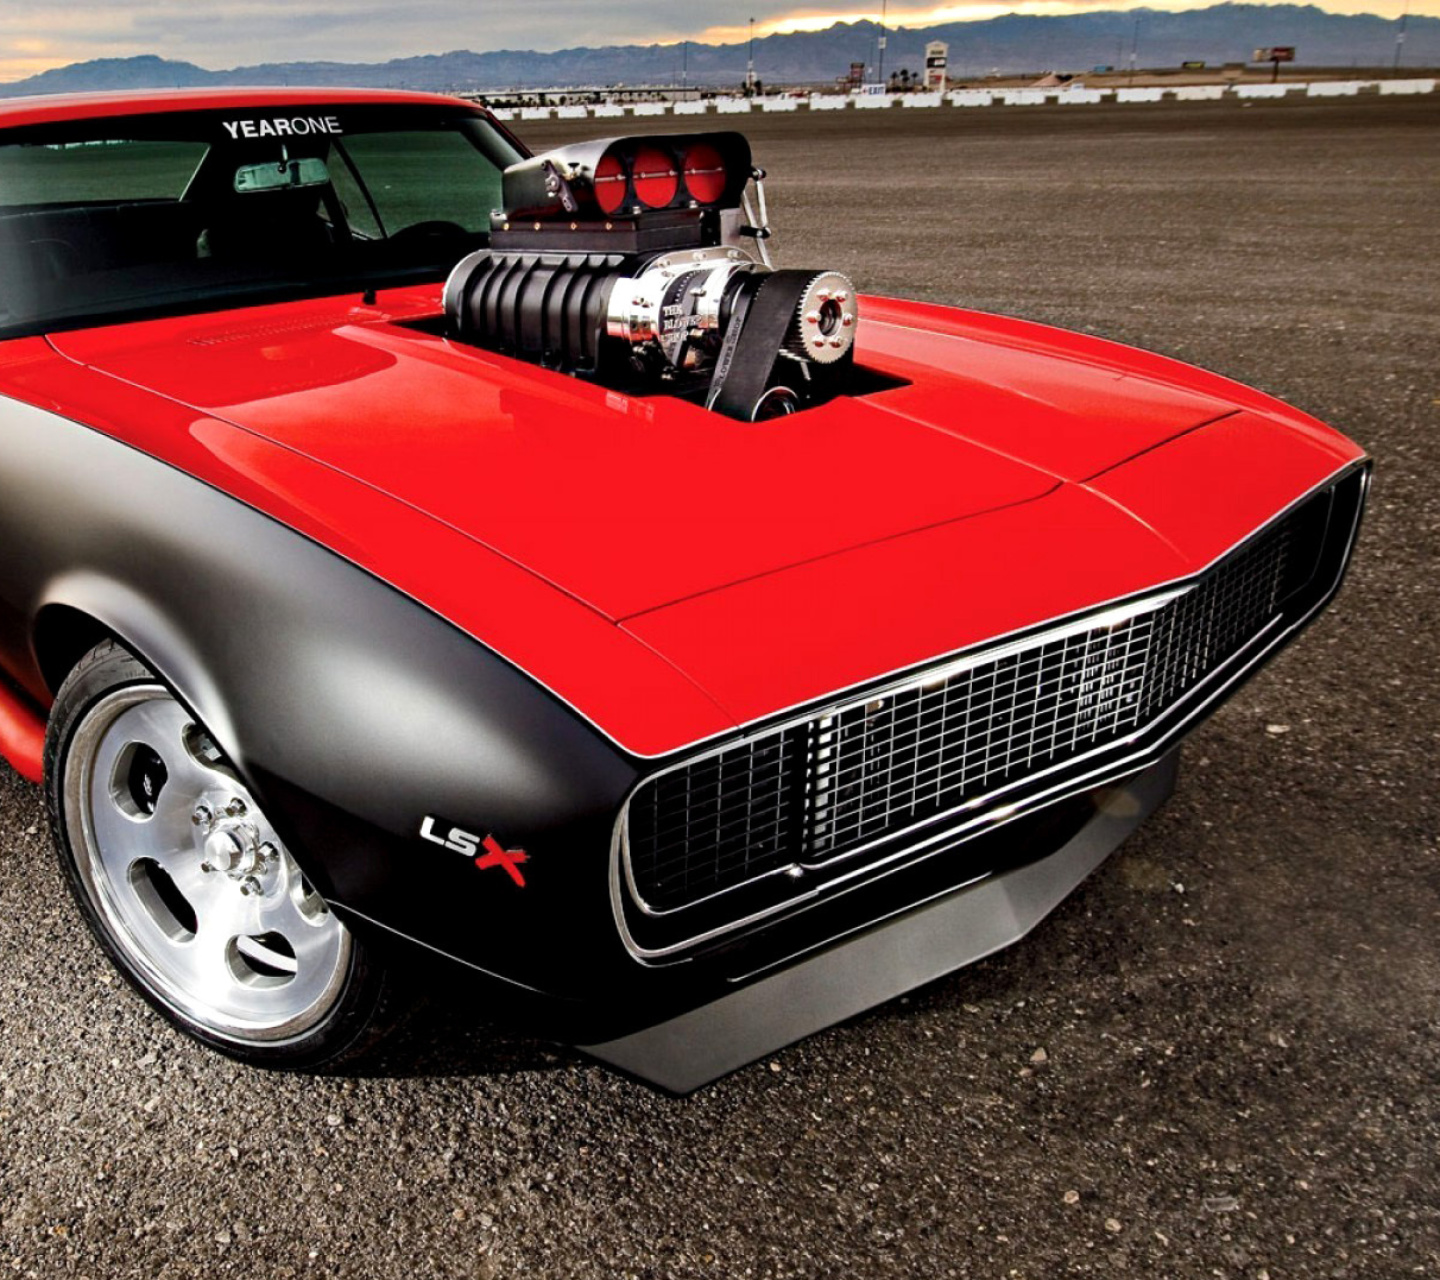 Das Chevrolet Hot Rod Muscle Car with GM Engine Wallpaper 1440x1280